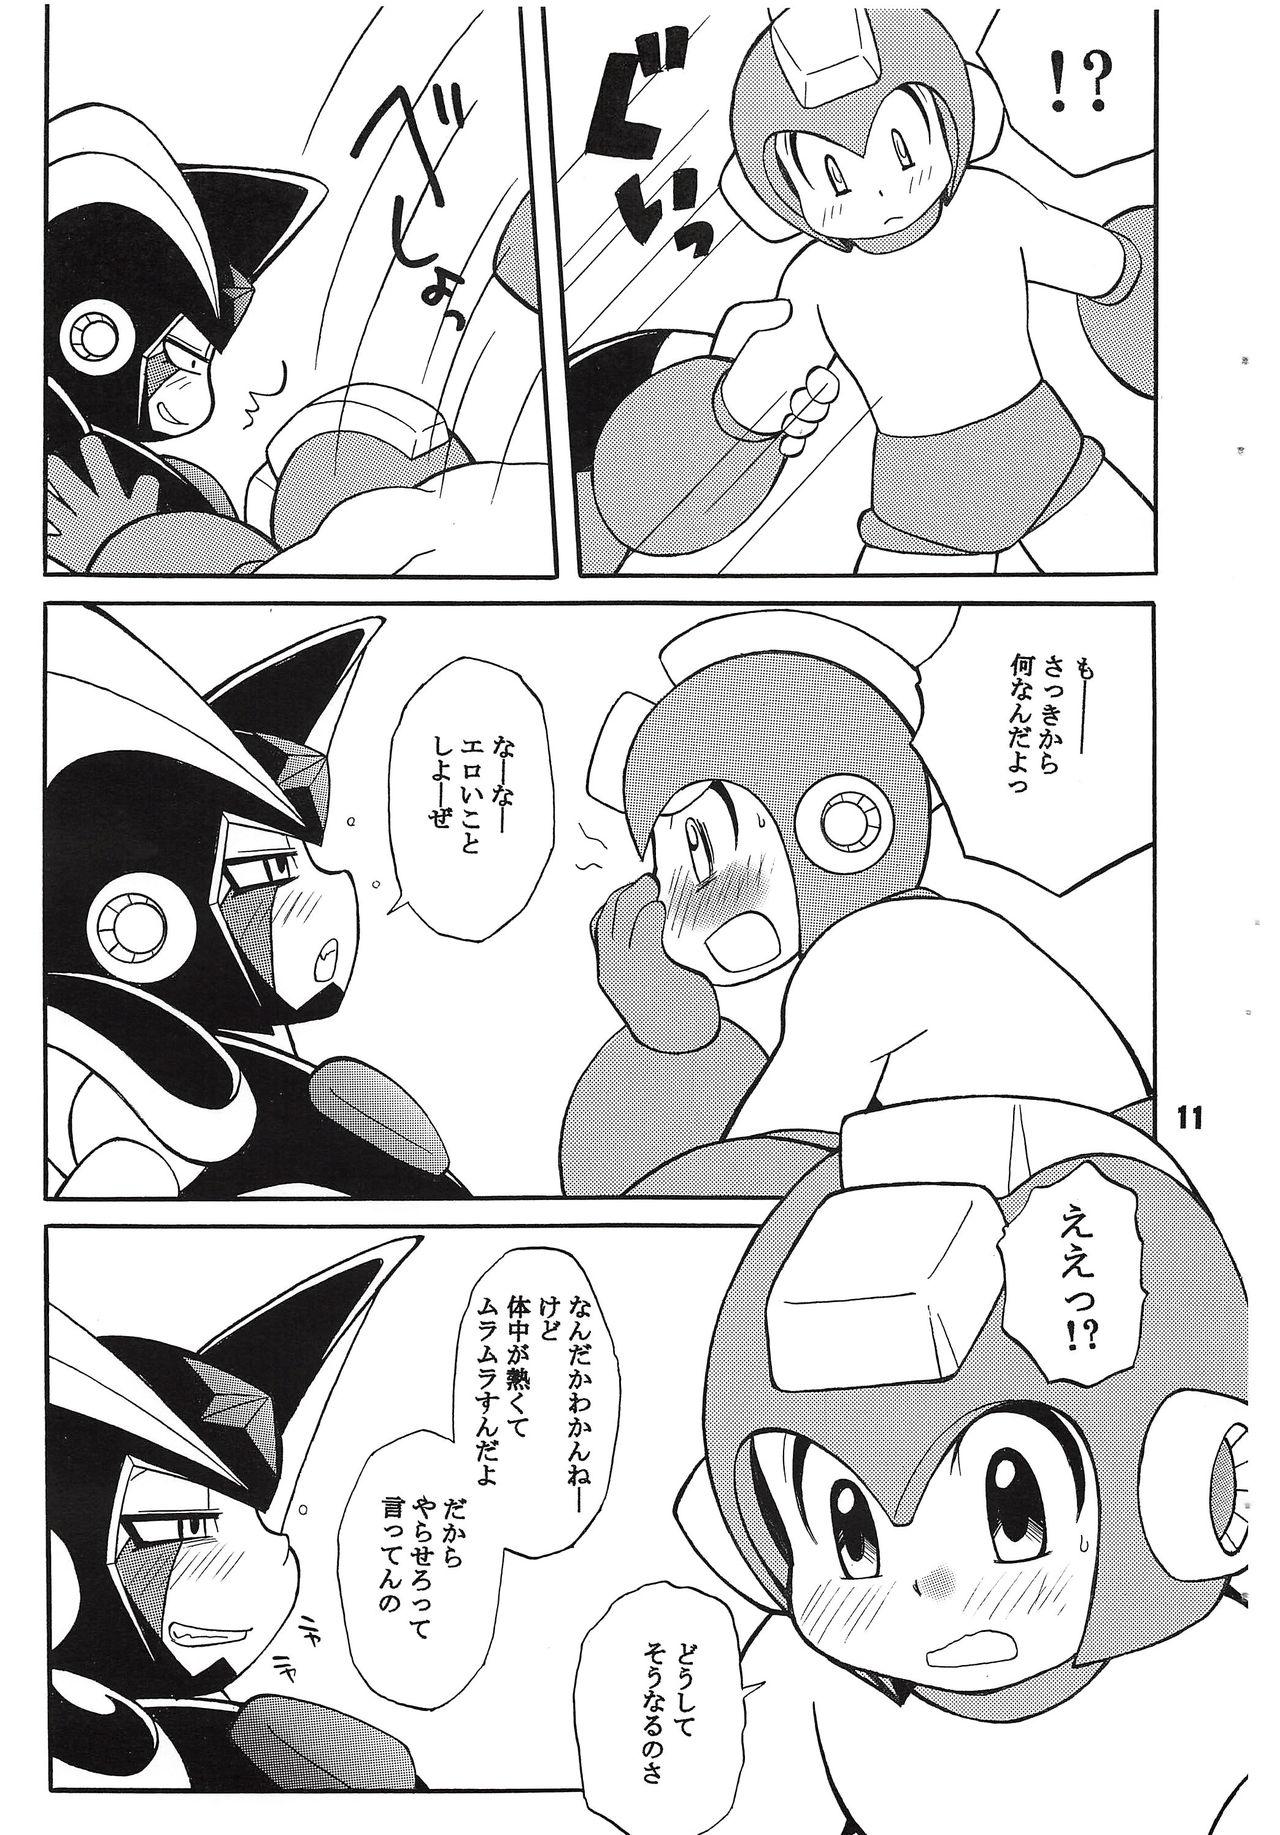 Indonesian BASS DRUNKER - Megaman Fingers - Page 11